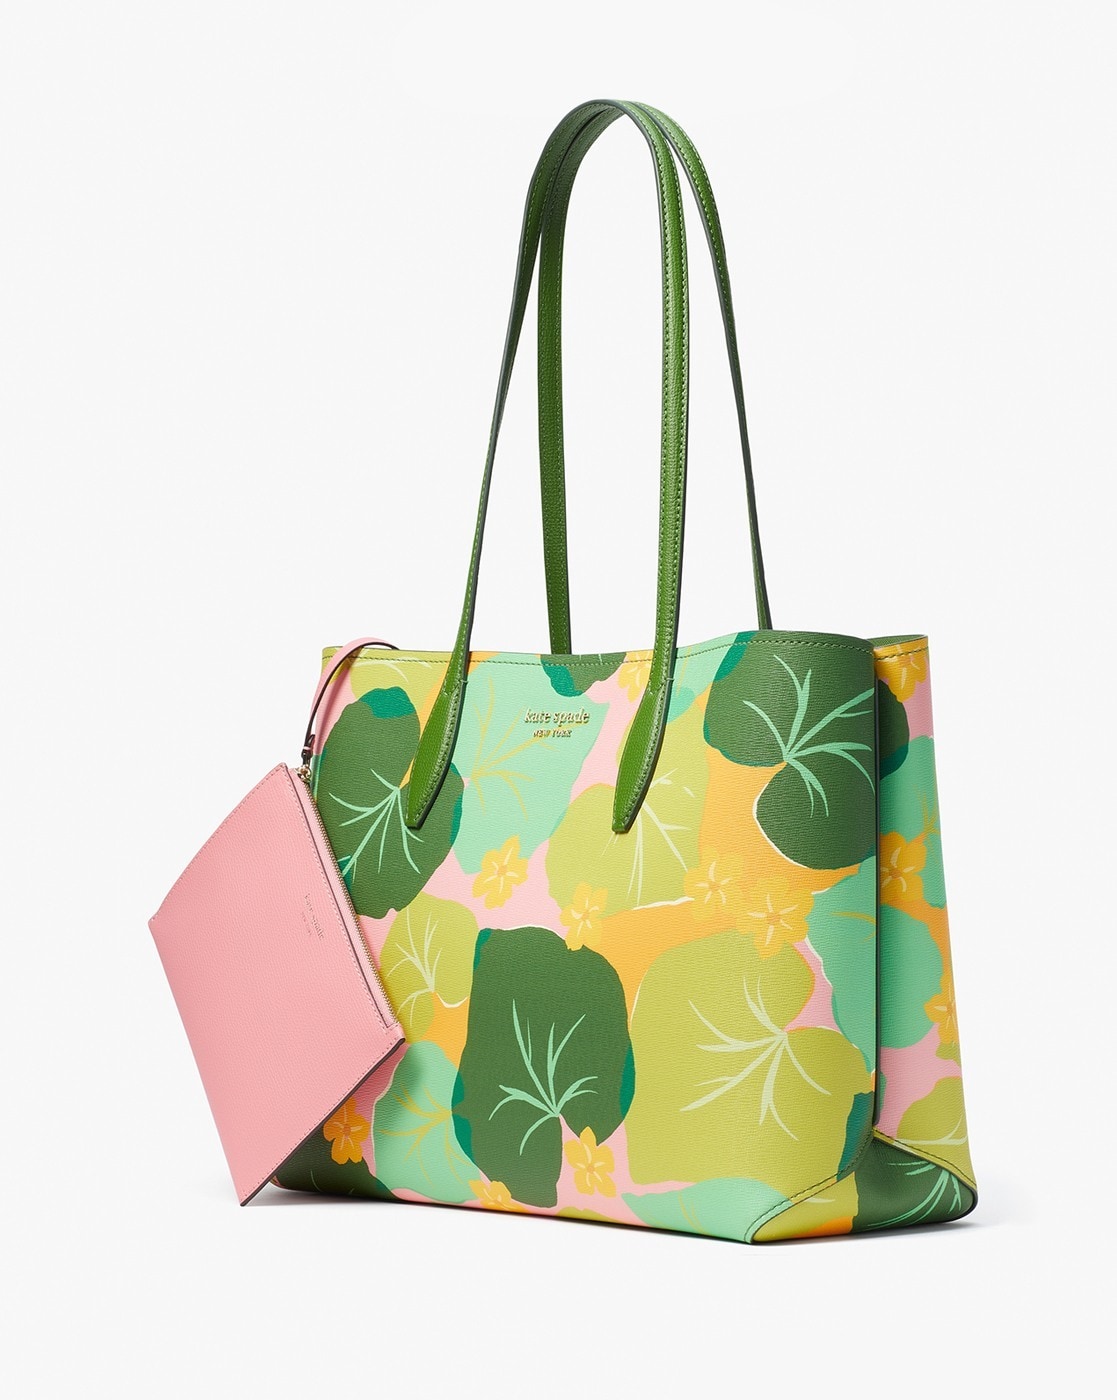 Kate Spade New York Molly Party Tote Floral Green Handbag Purse & Pouch  New! | eBay